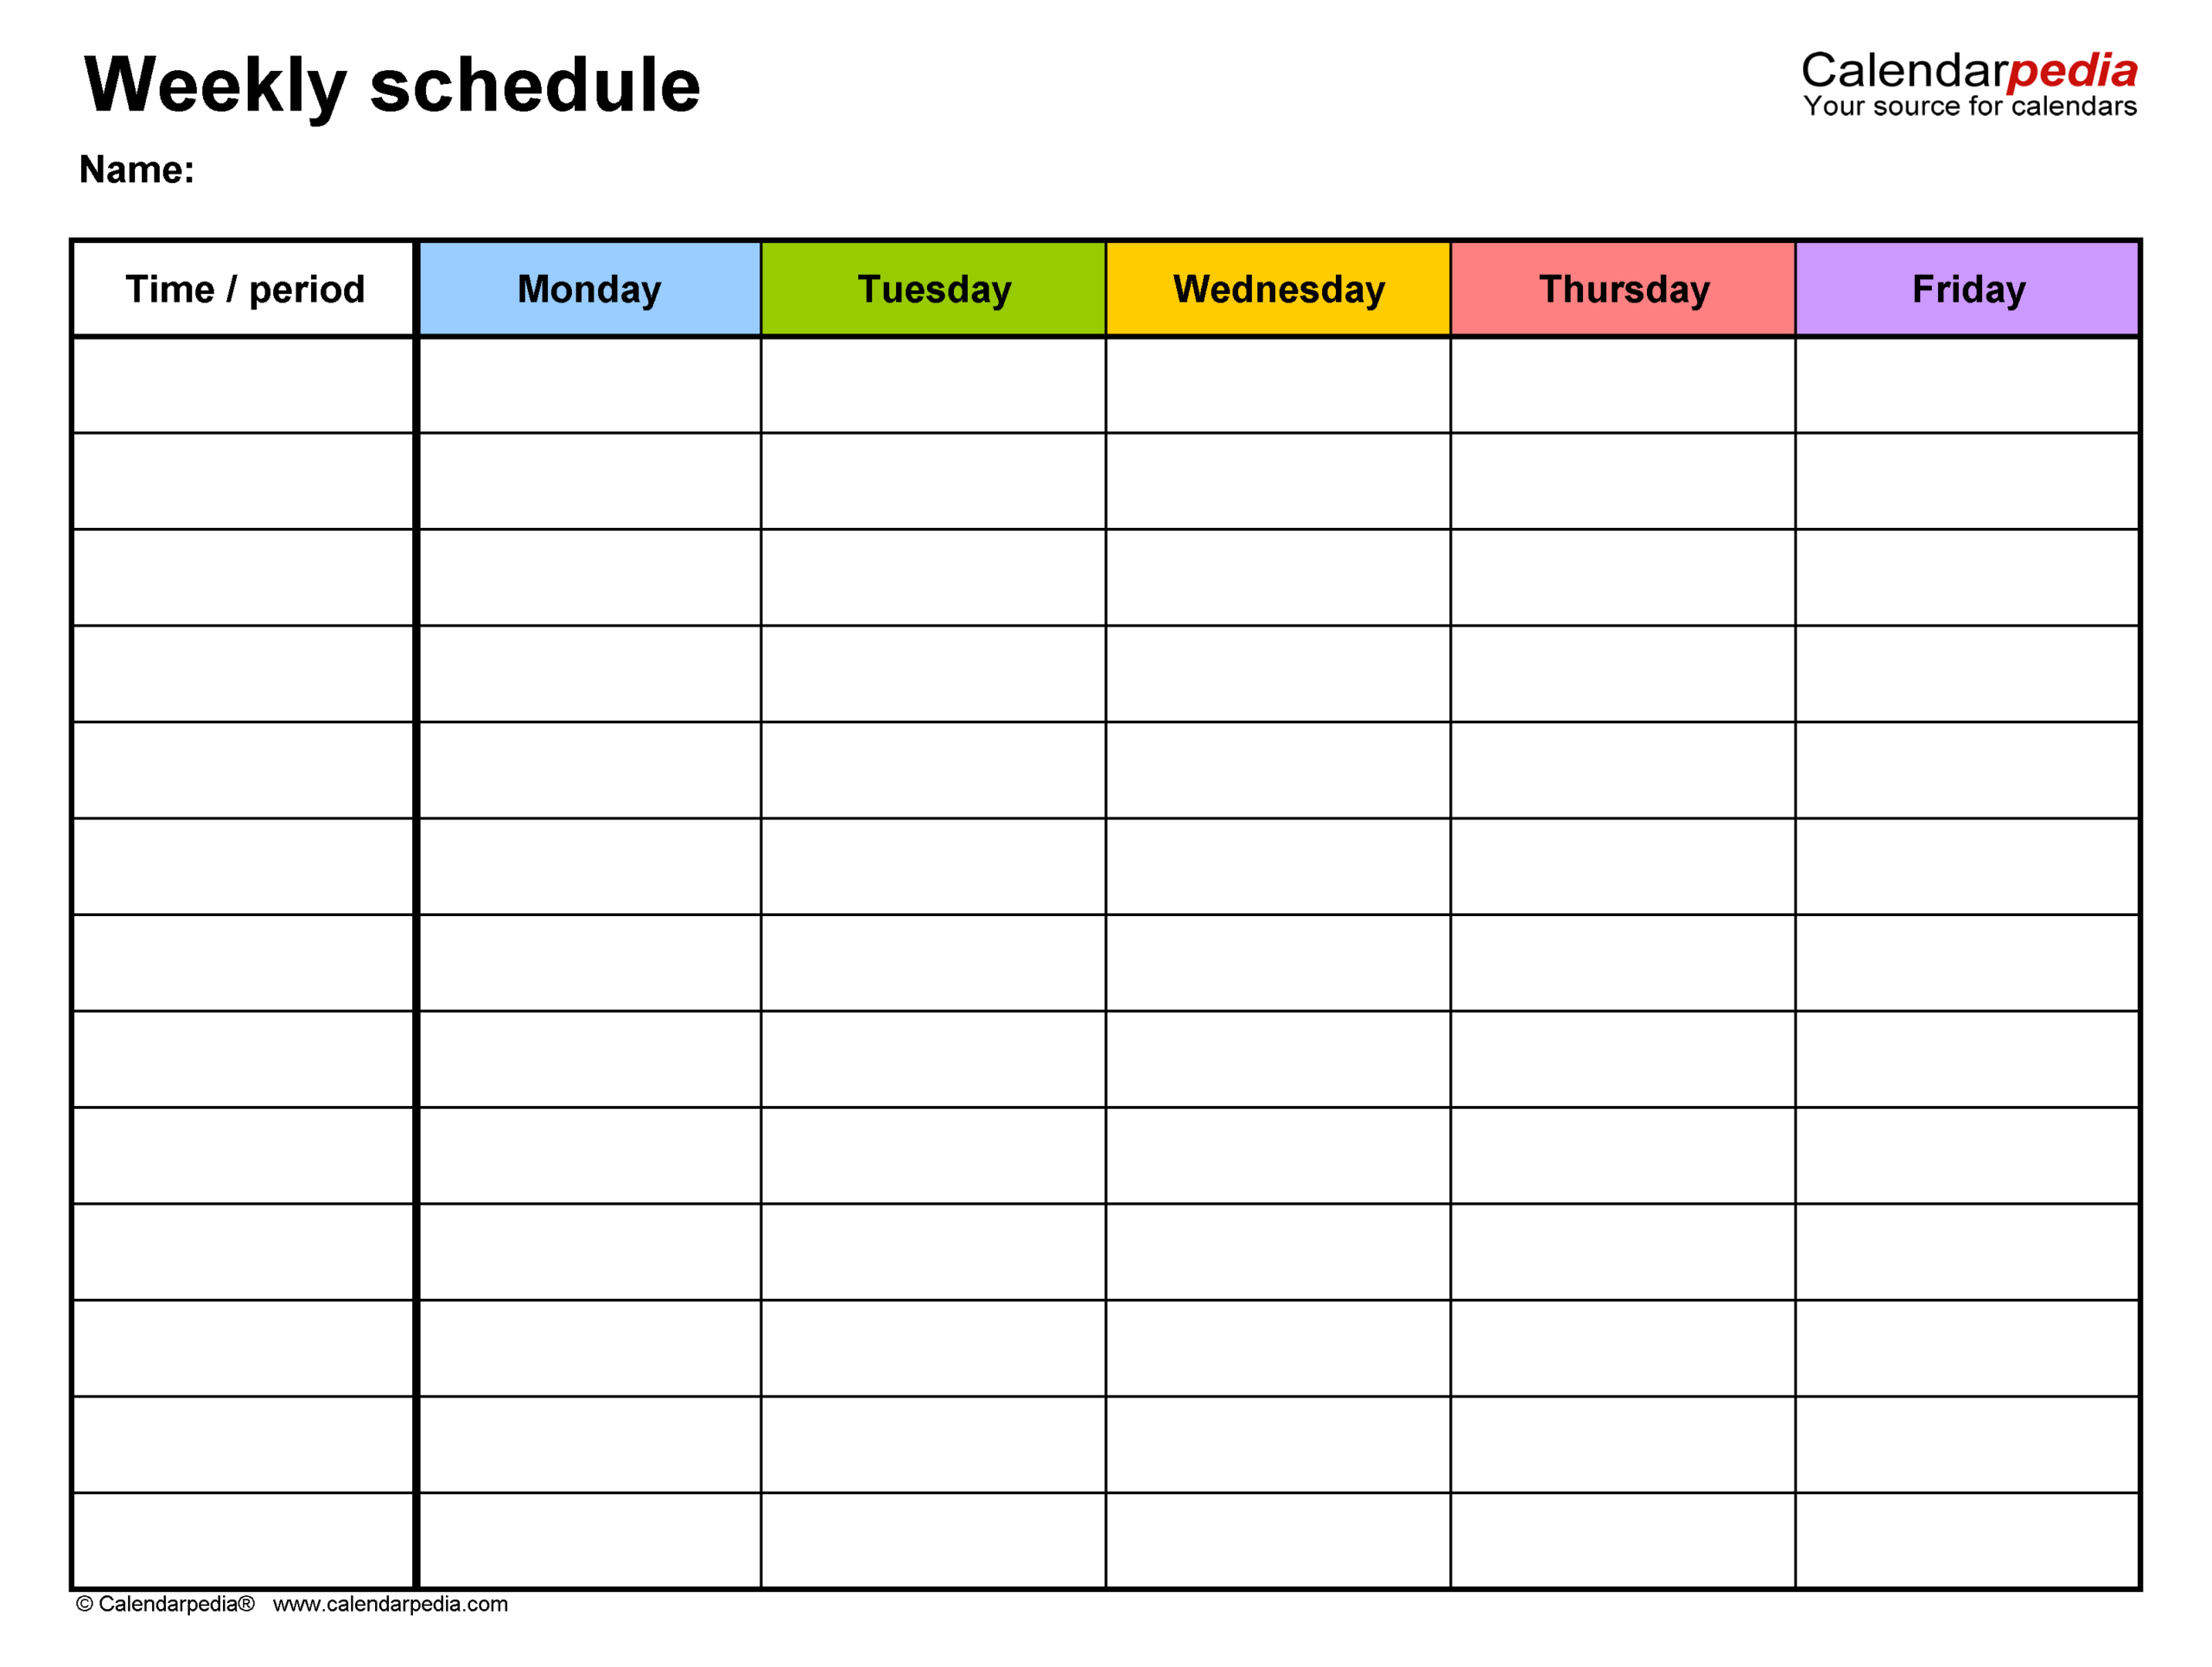 Free Weekly Schedules For Word - 18 Templates